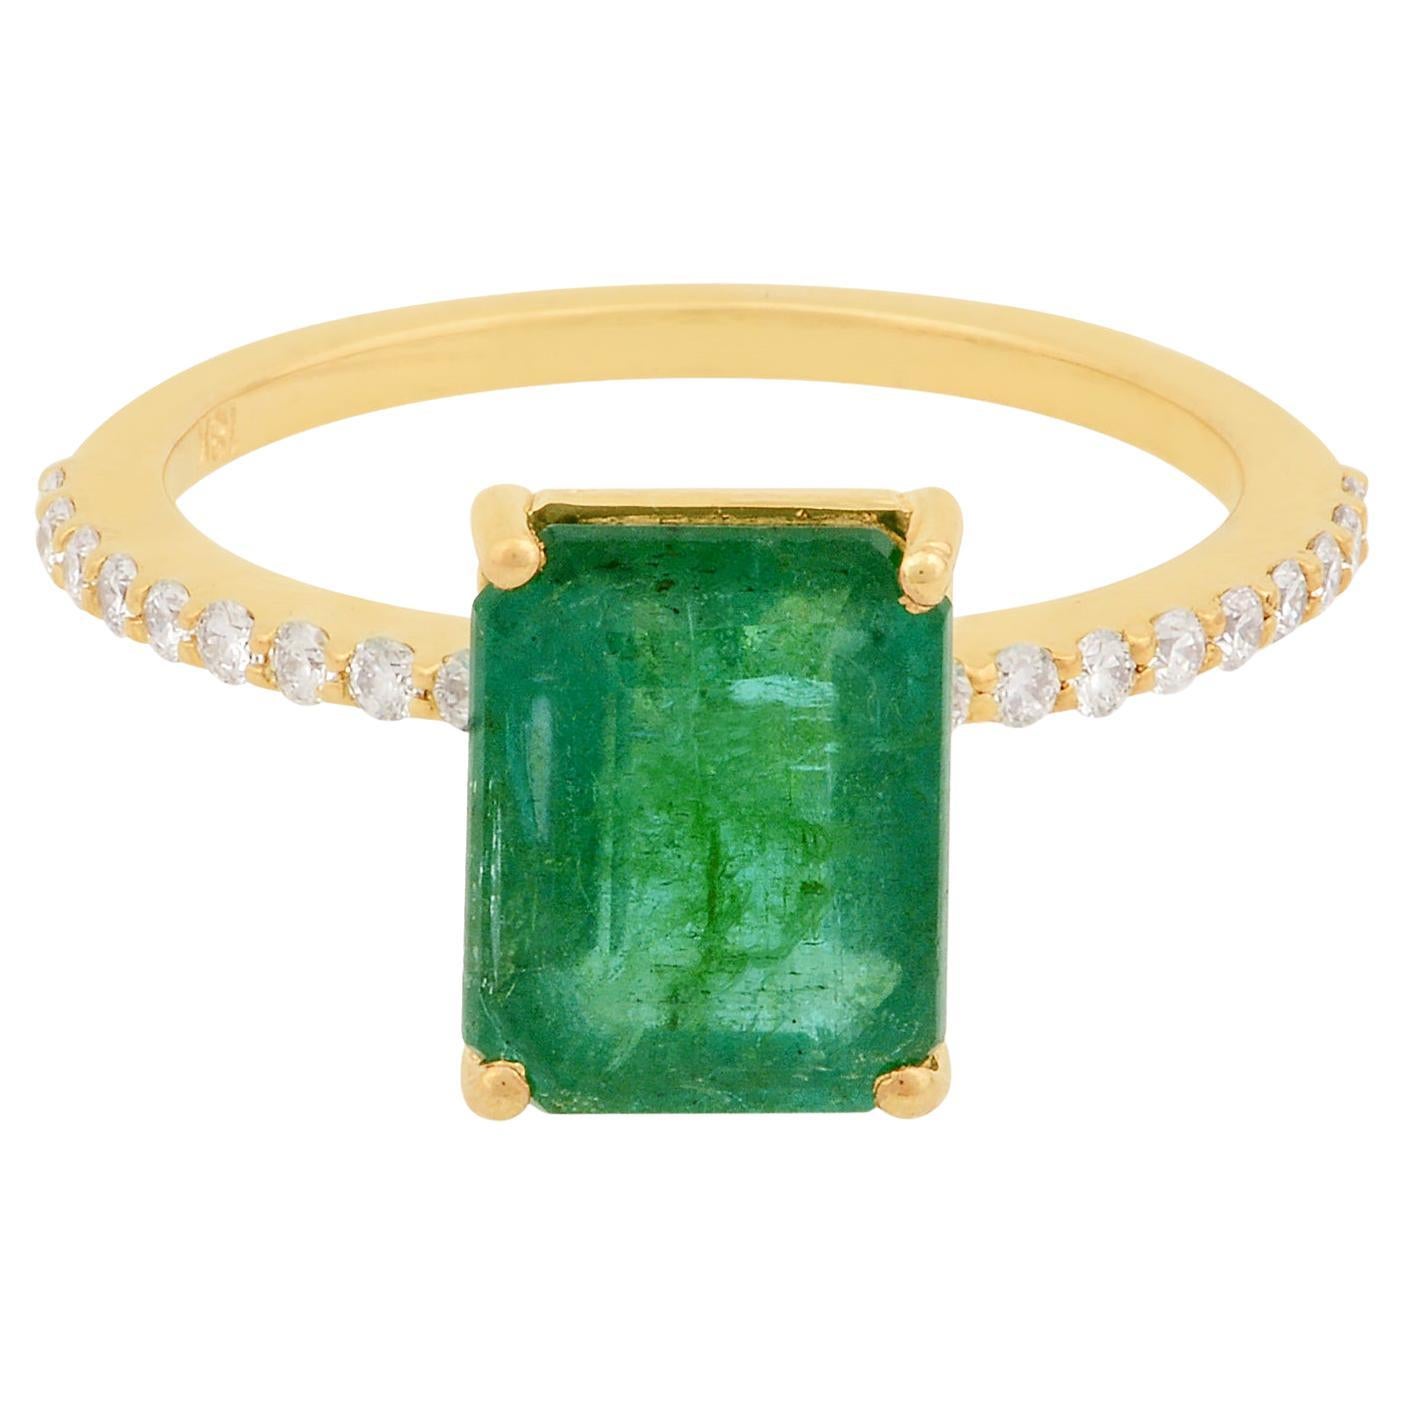 For Sale:  Natural Emerald Gemstone Ring Diamond Pave Solid 18k Yellow Gold Jewelry